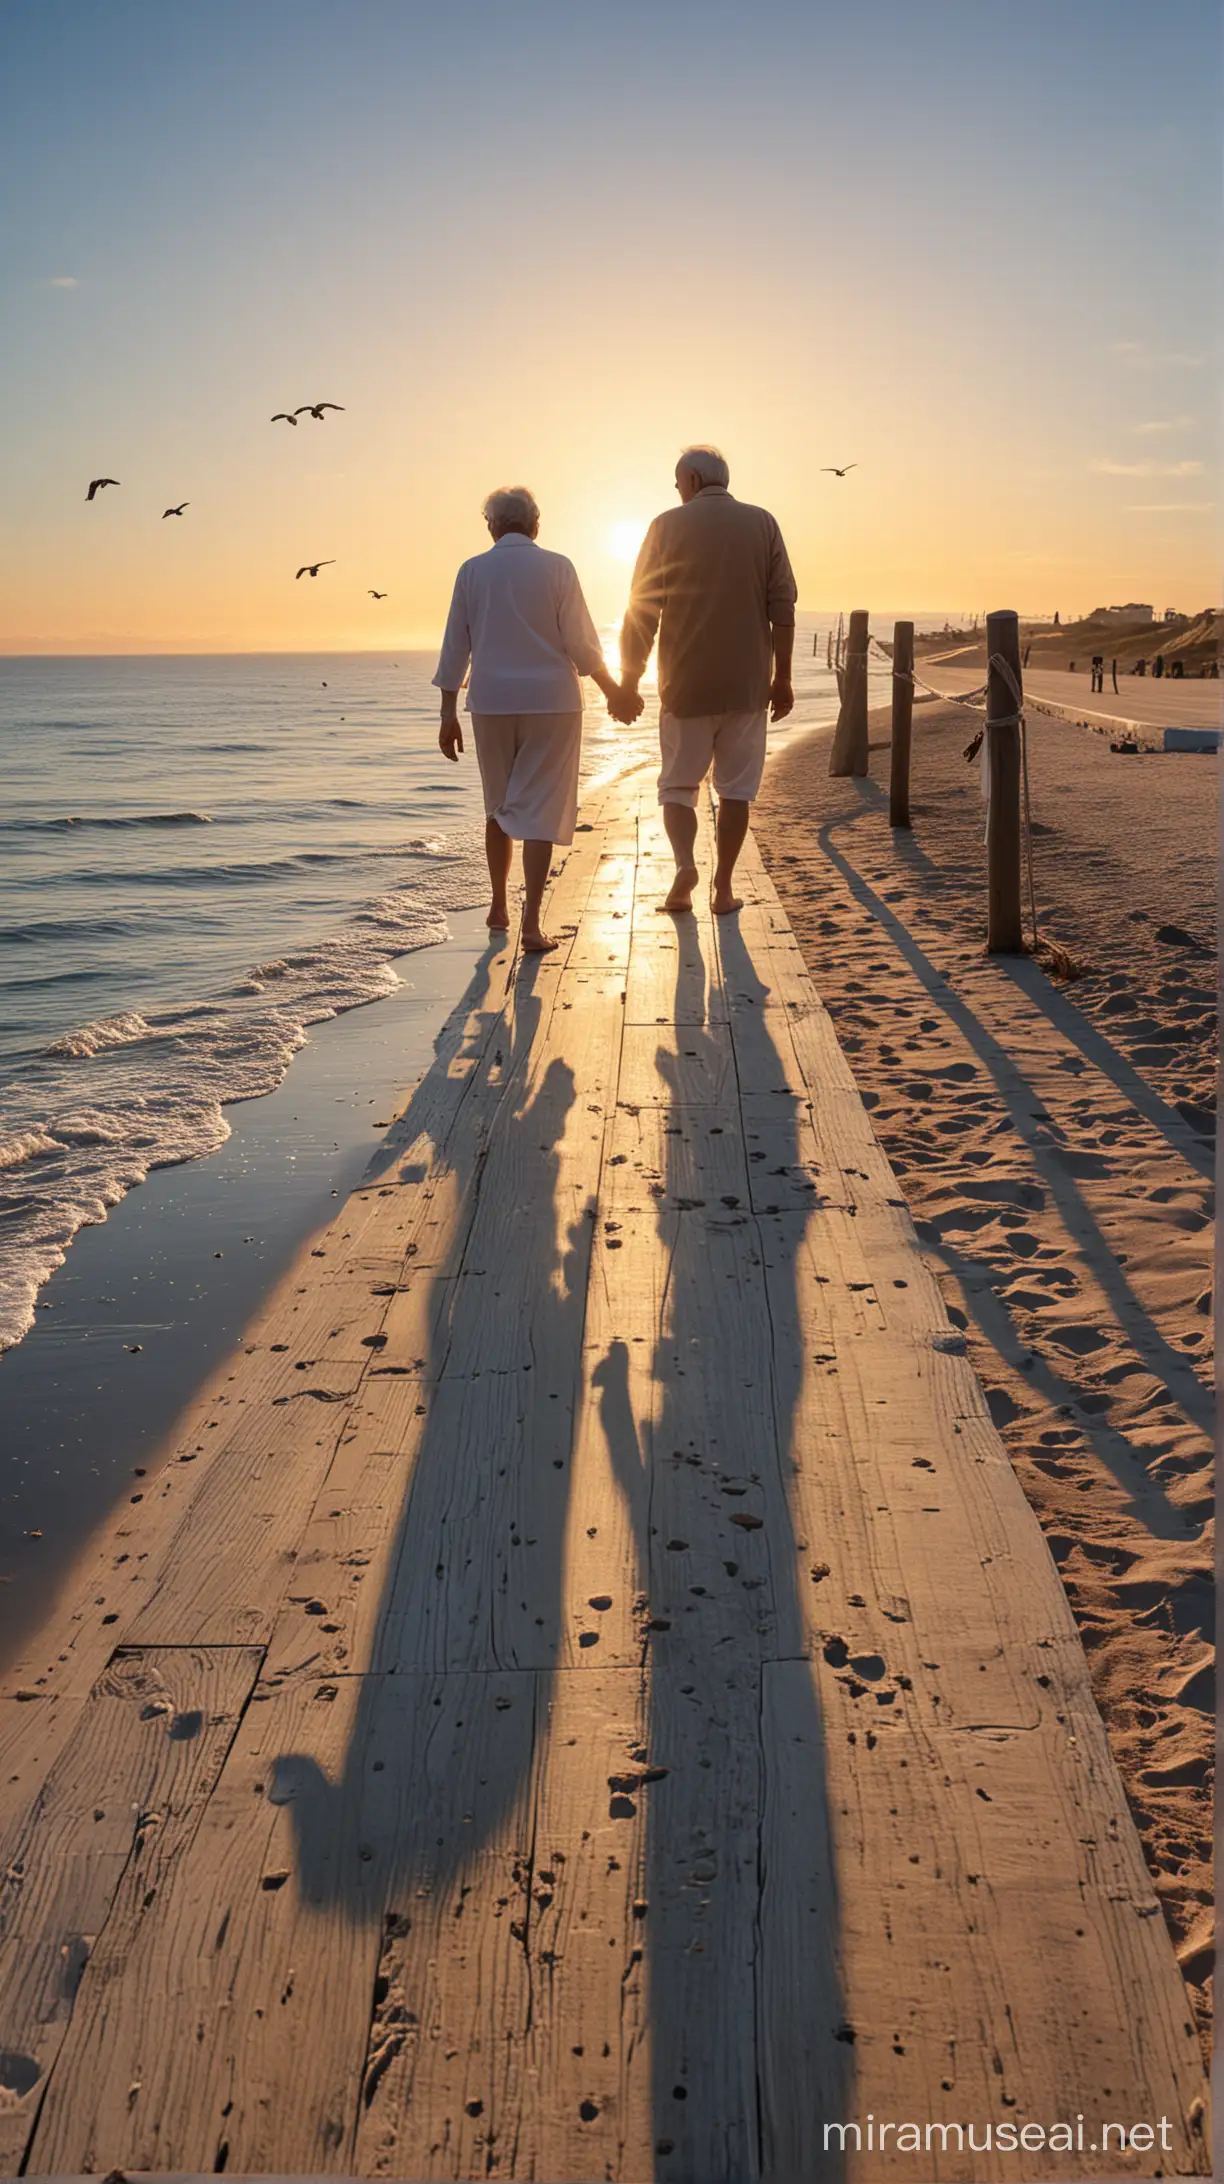  a elderly Italian couple bare feet, walking off together holding hands towards the sunset on a boardwalk on the ocean, clear vivid blue sky with birds, ships in the distance. Warm sunny day. Ultra High Quality, Ultra HD, 8K, Vivid Brushstrokes, real life image